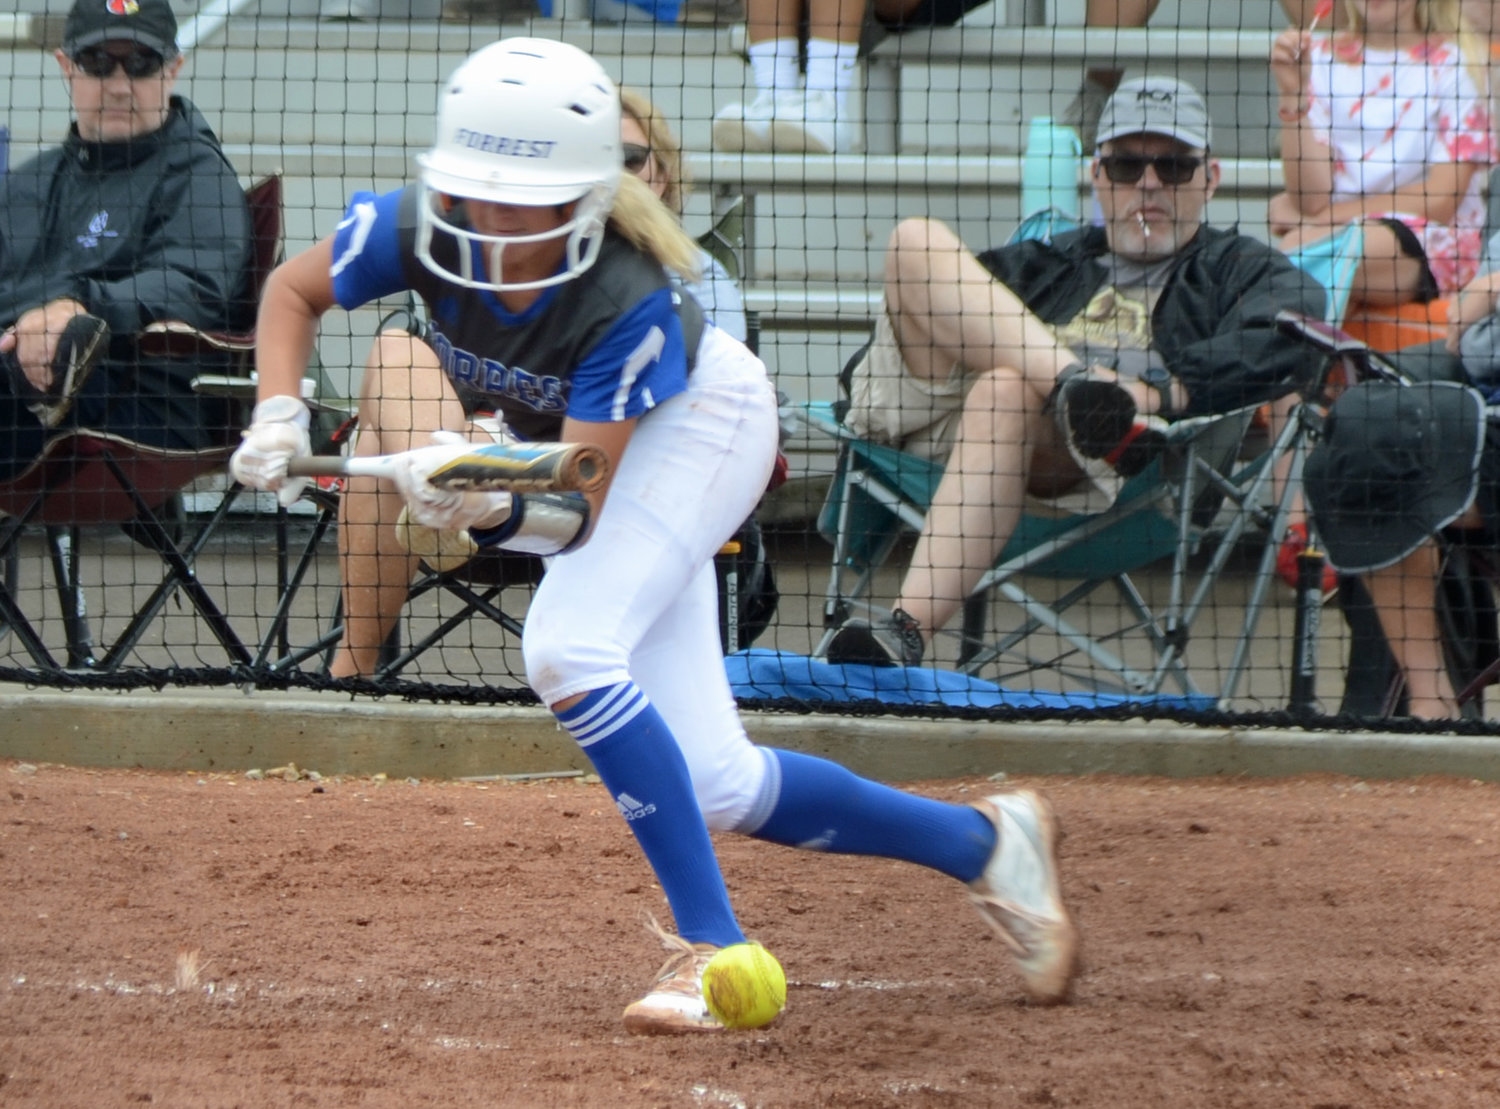 Macyn Kirby continued as the master table setter for the Lady Rockets, going 4-for-5 with three runs scored.